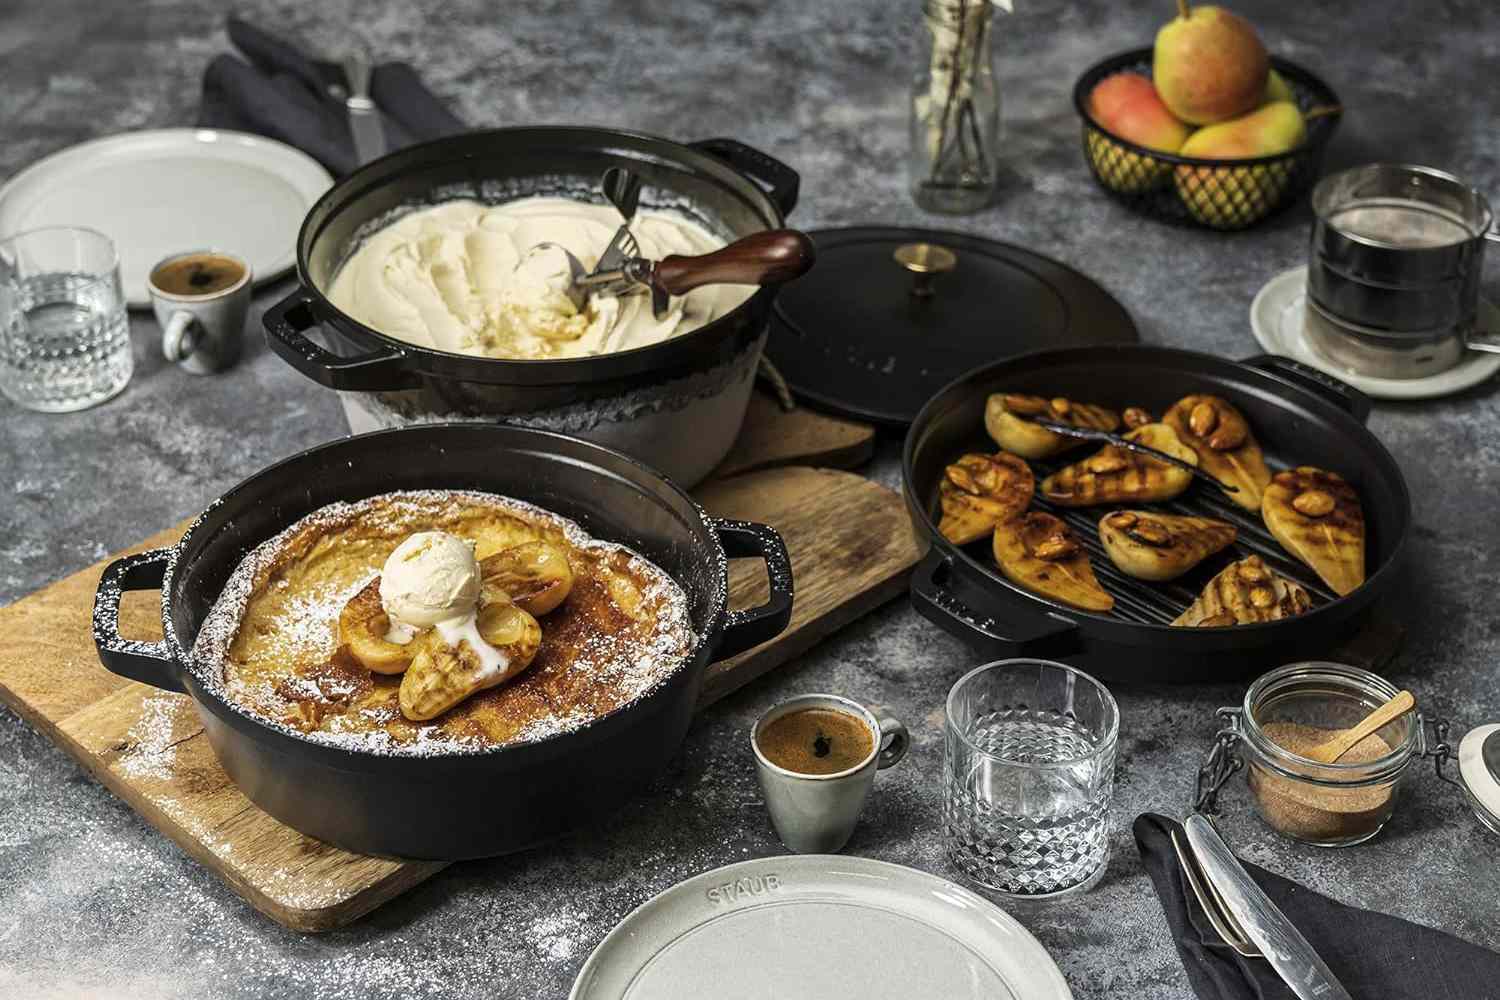 Amazon Is Packed With Cast Iron Cookware Deals, Including Up to 53% Off Lodge, Le Creuset, and Staub